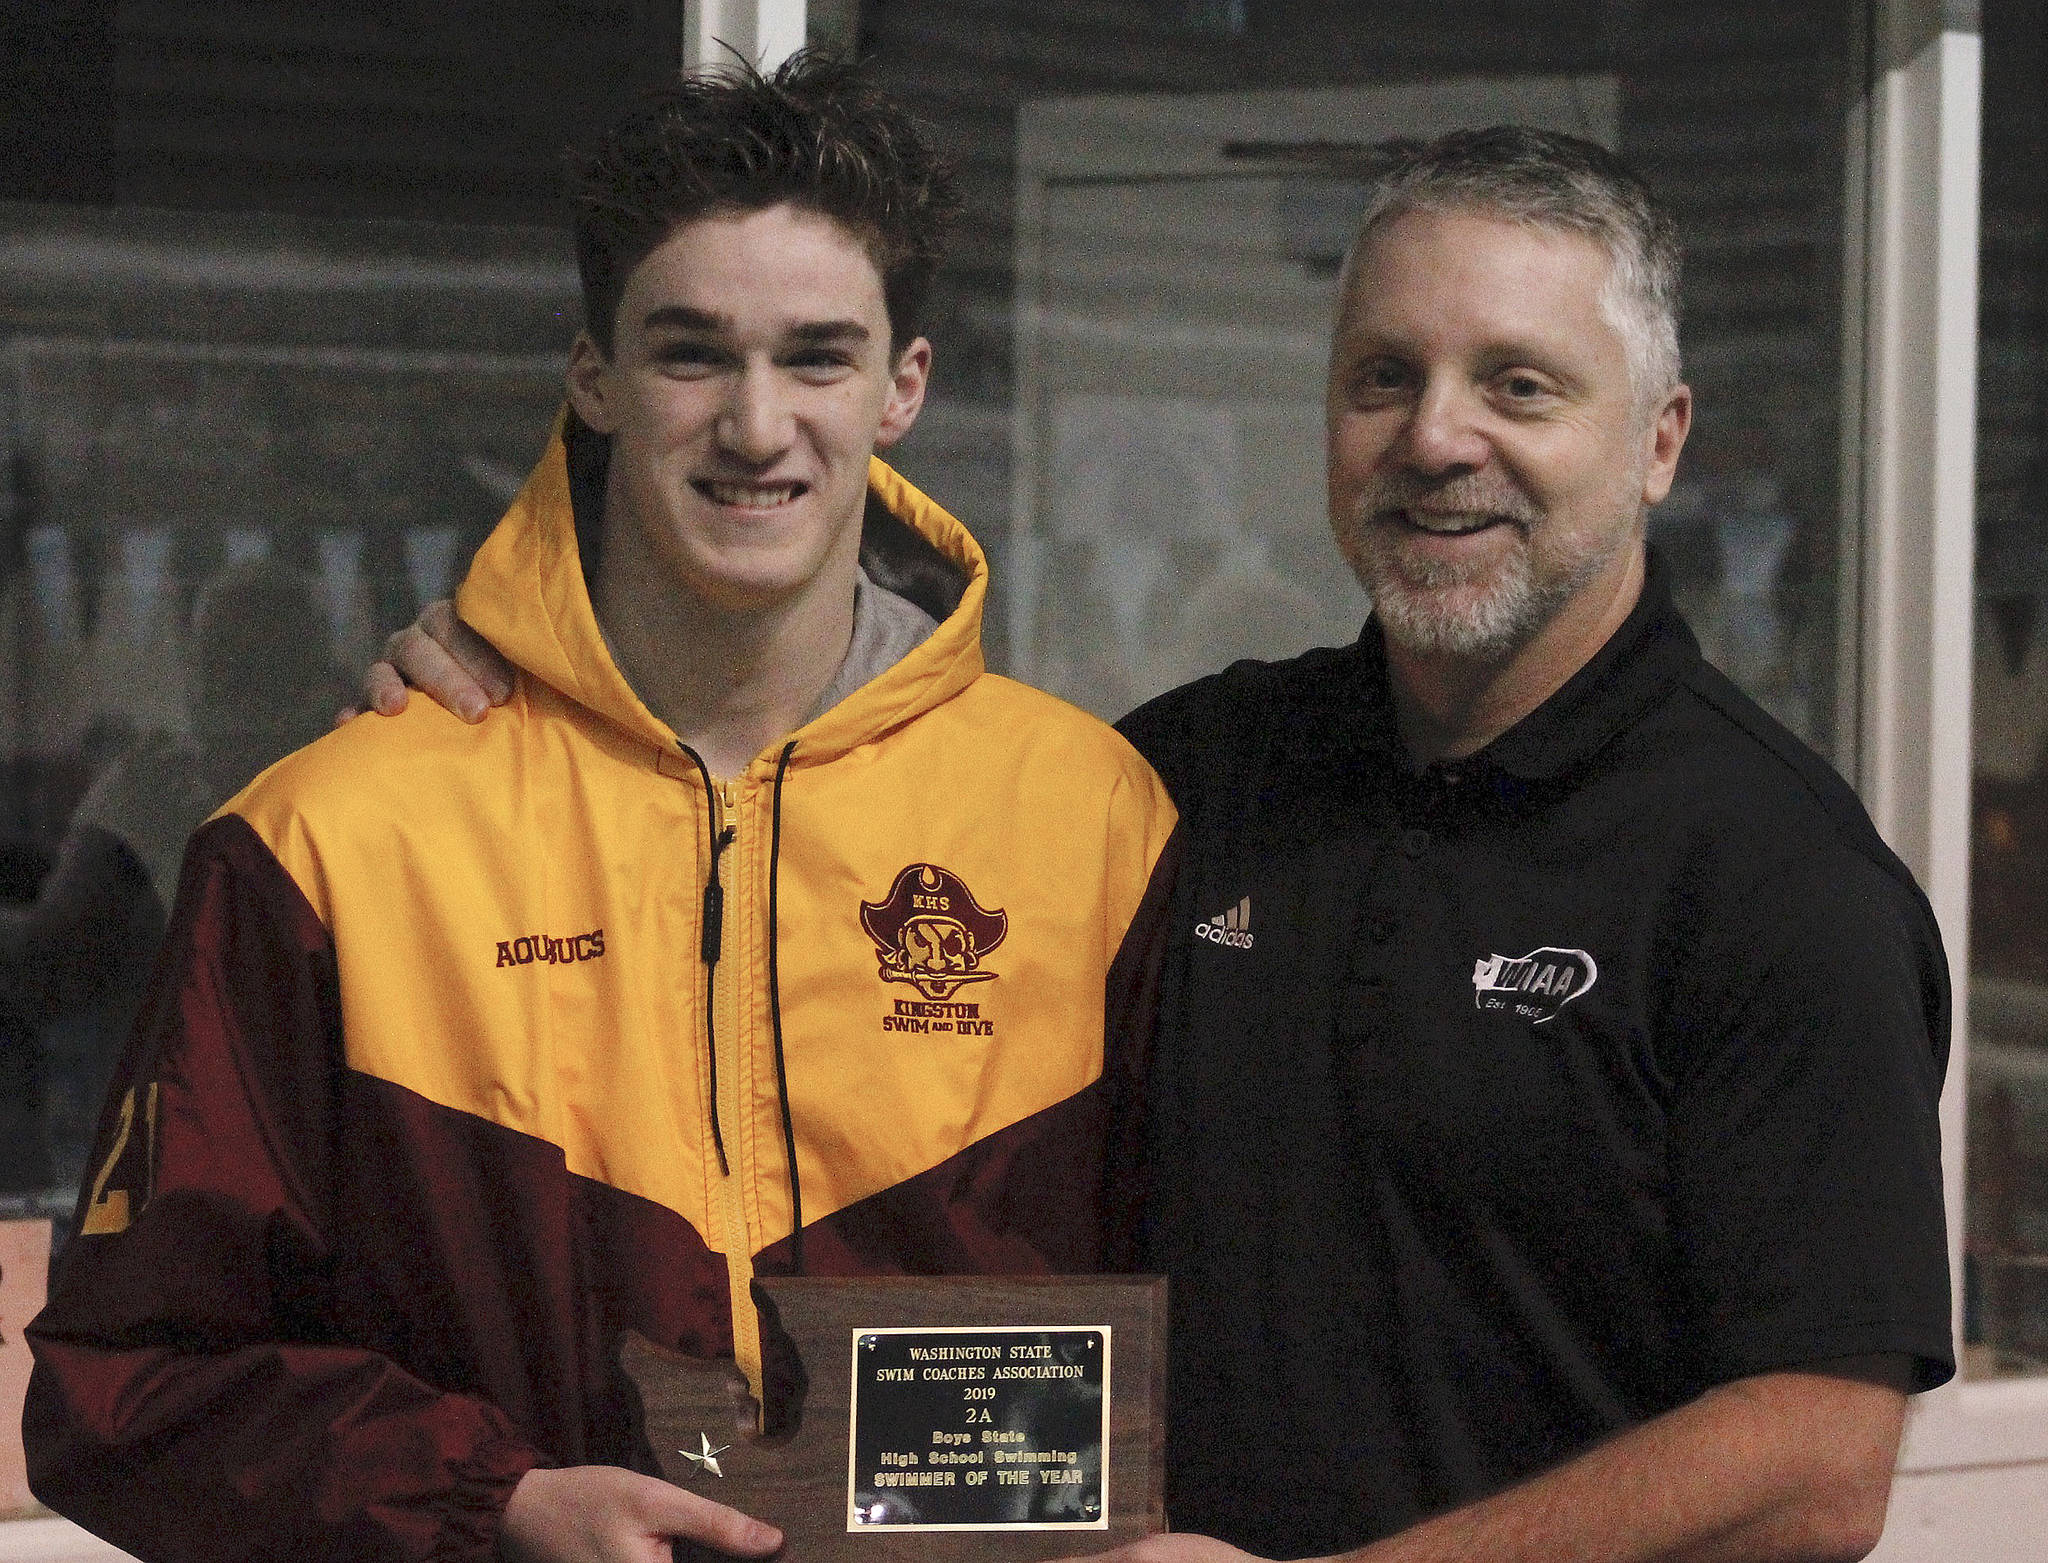 Kingston senior Tim Gallagher was named Swimmer of the Meet at the 2019 2A state championship. (Mark Krulish/Kitsap News Group)